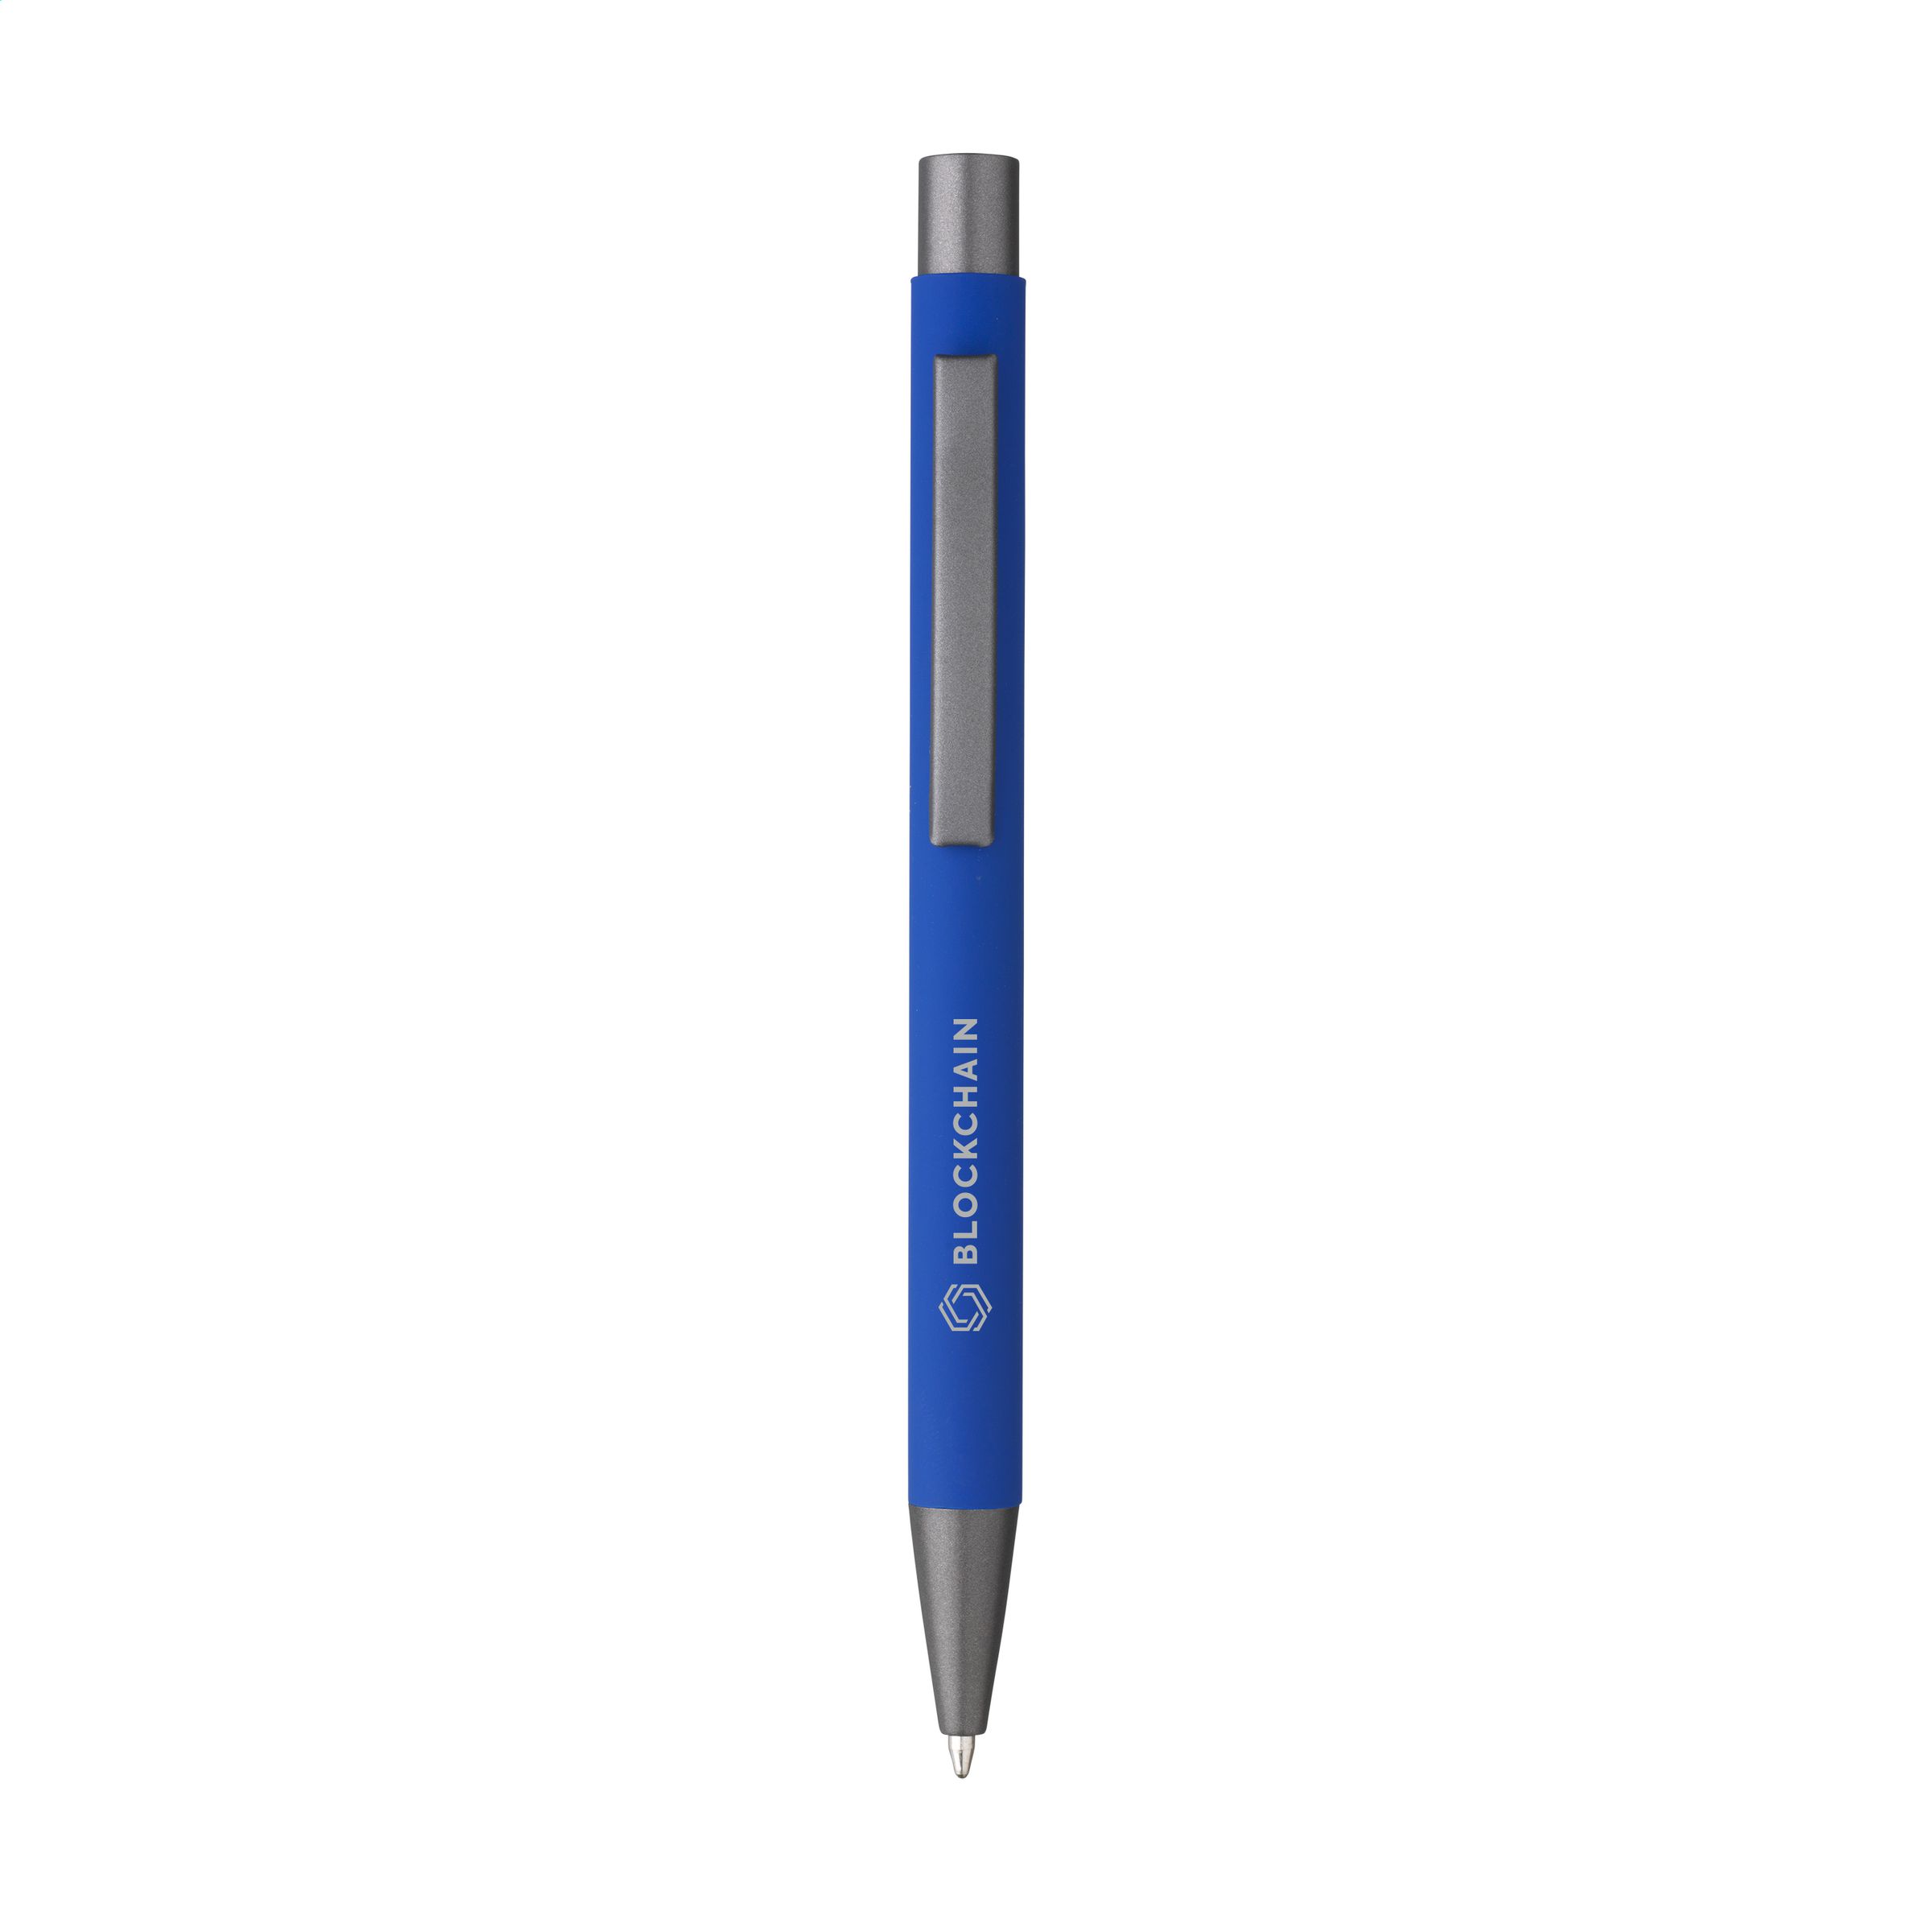 Brady Soft Touch stylus pen - Chagford - Bishop Auckland